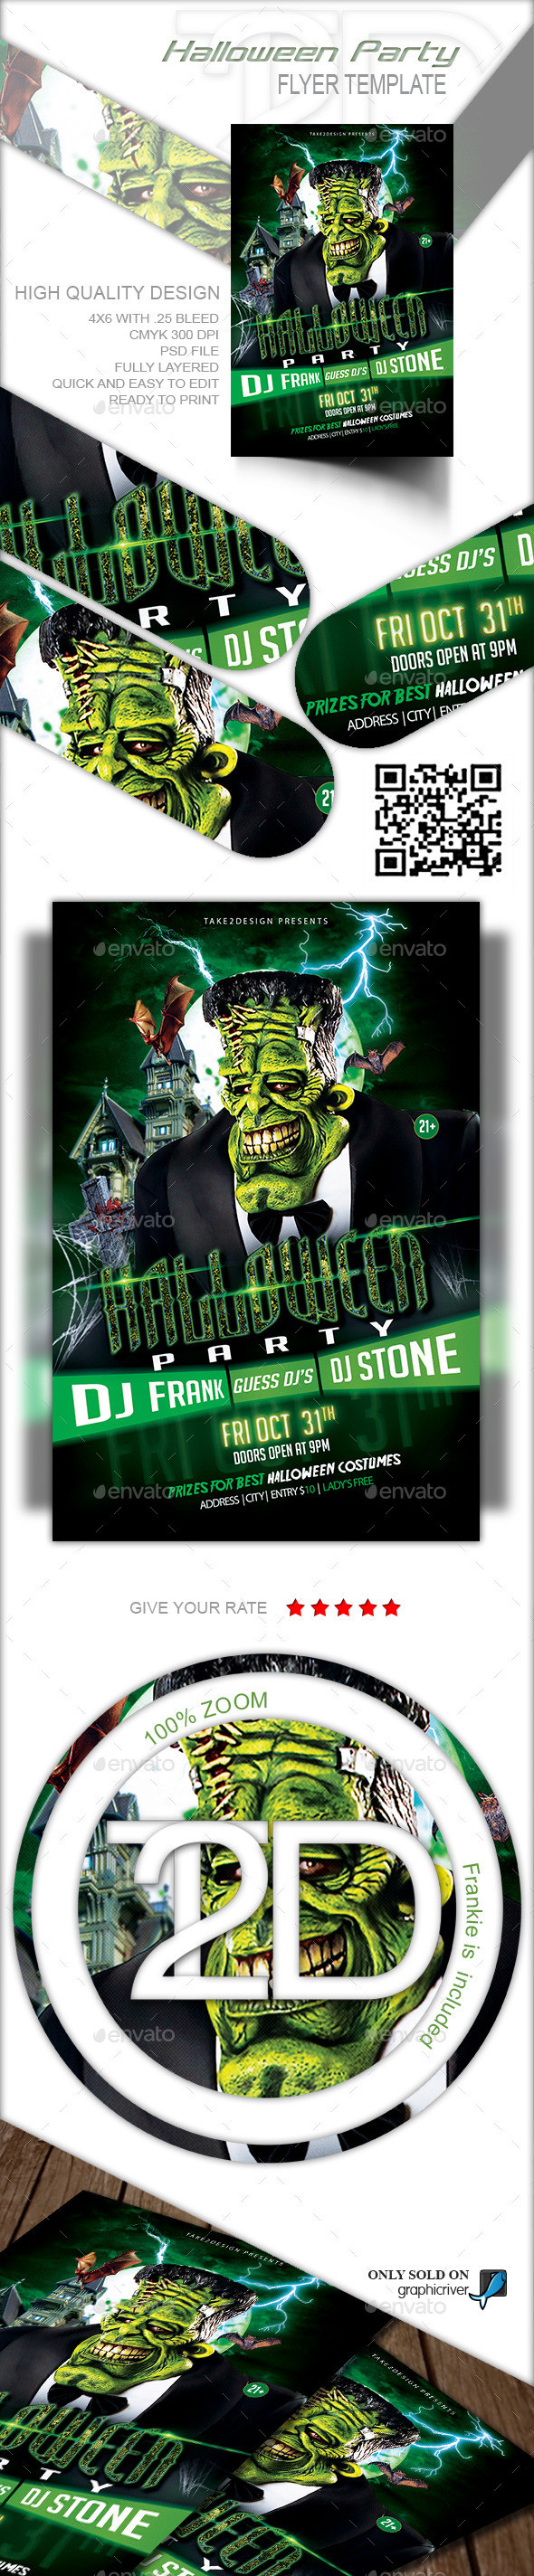 Preview 20  20halloween 20party 20flyer 20template 20 design 20by 20take2design 